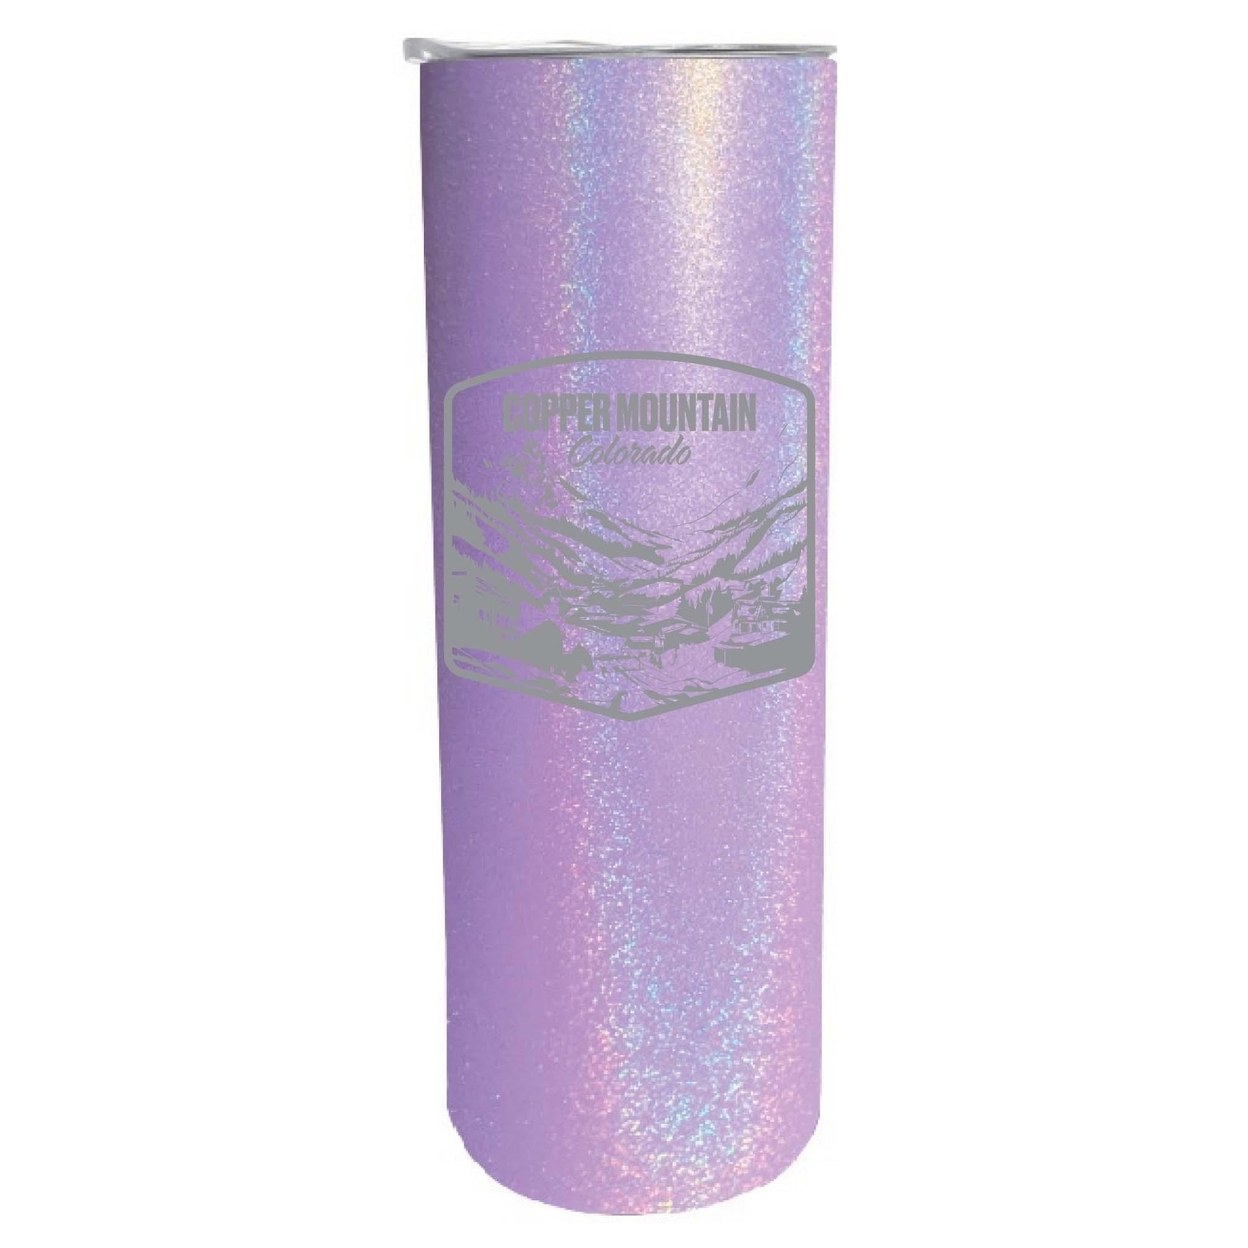 Copper Mountain Souvenir 20 Oz Engraved Insulated Skinny Tumbler - Navy,,4-Pack